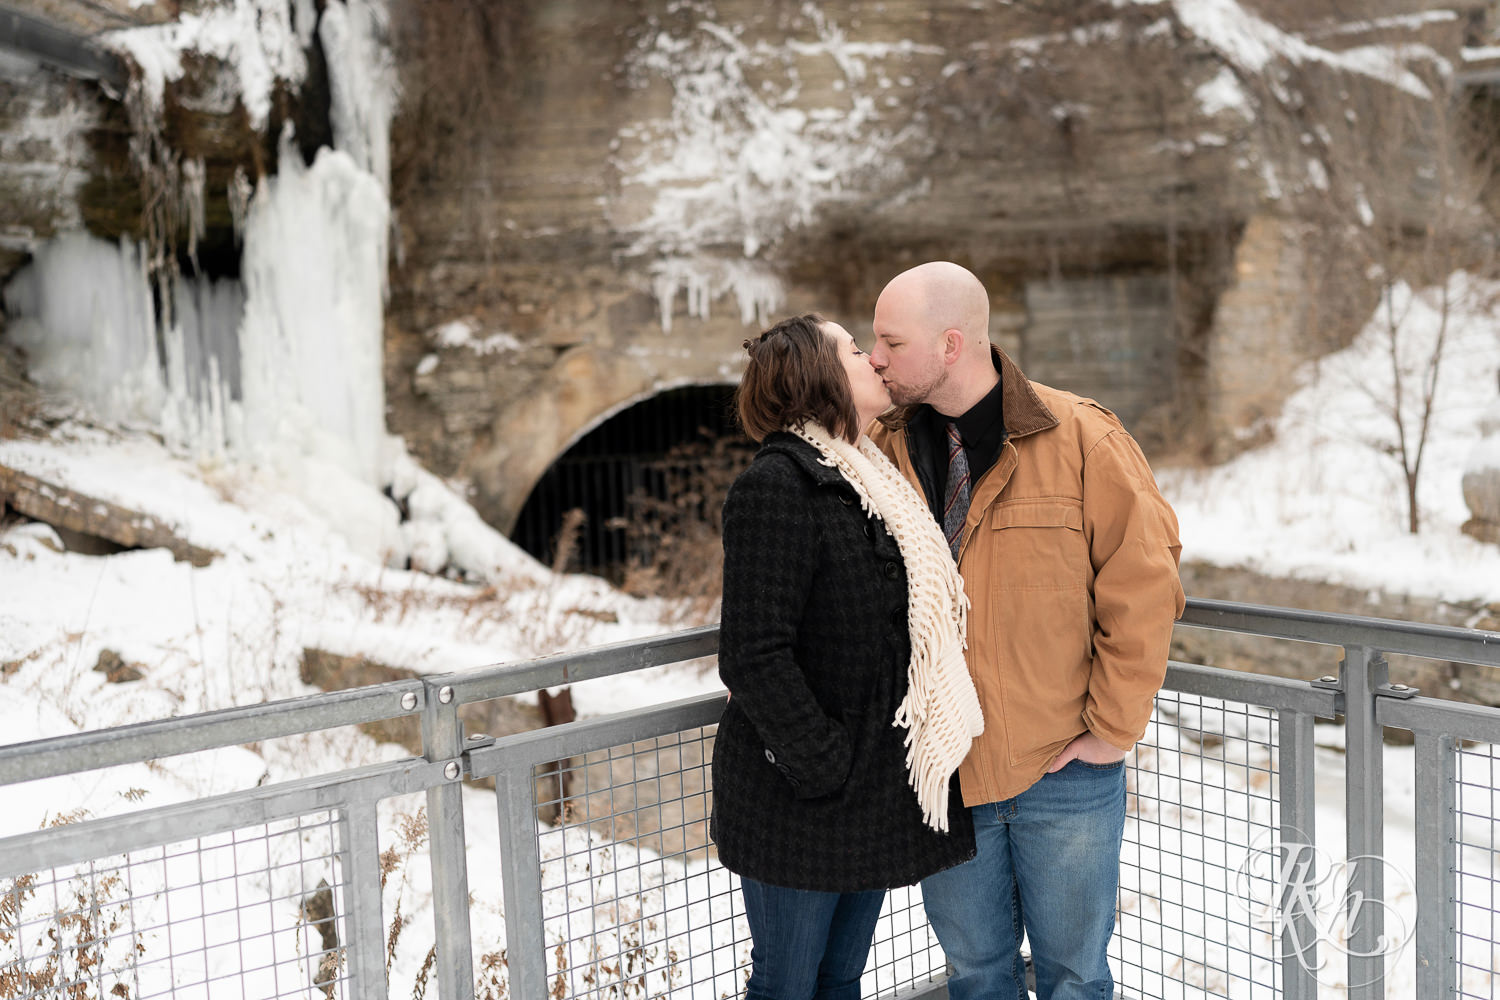 Man and woman kissing in front of frozen waterfall in snow at Mill City Ruins in Minneapolis, Minnesota.